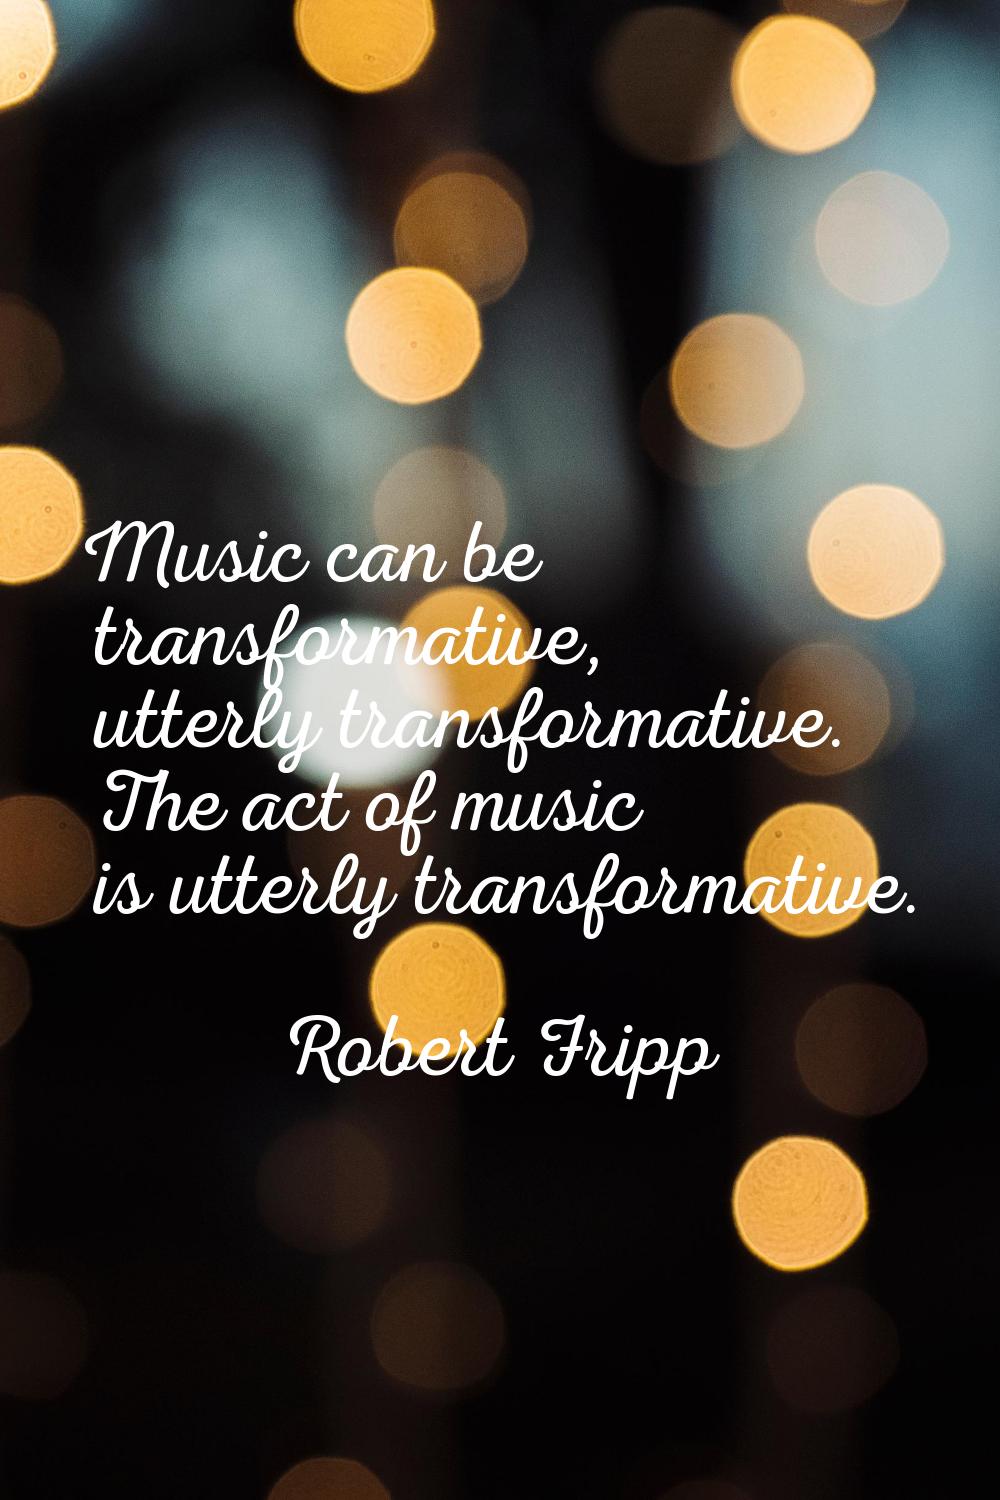 Music can be transformative, utterly transformative. The act of music is utterly transformative.